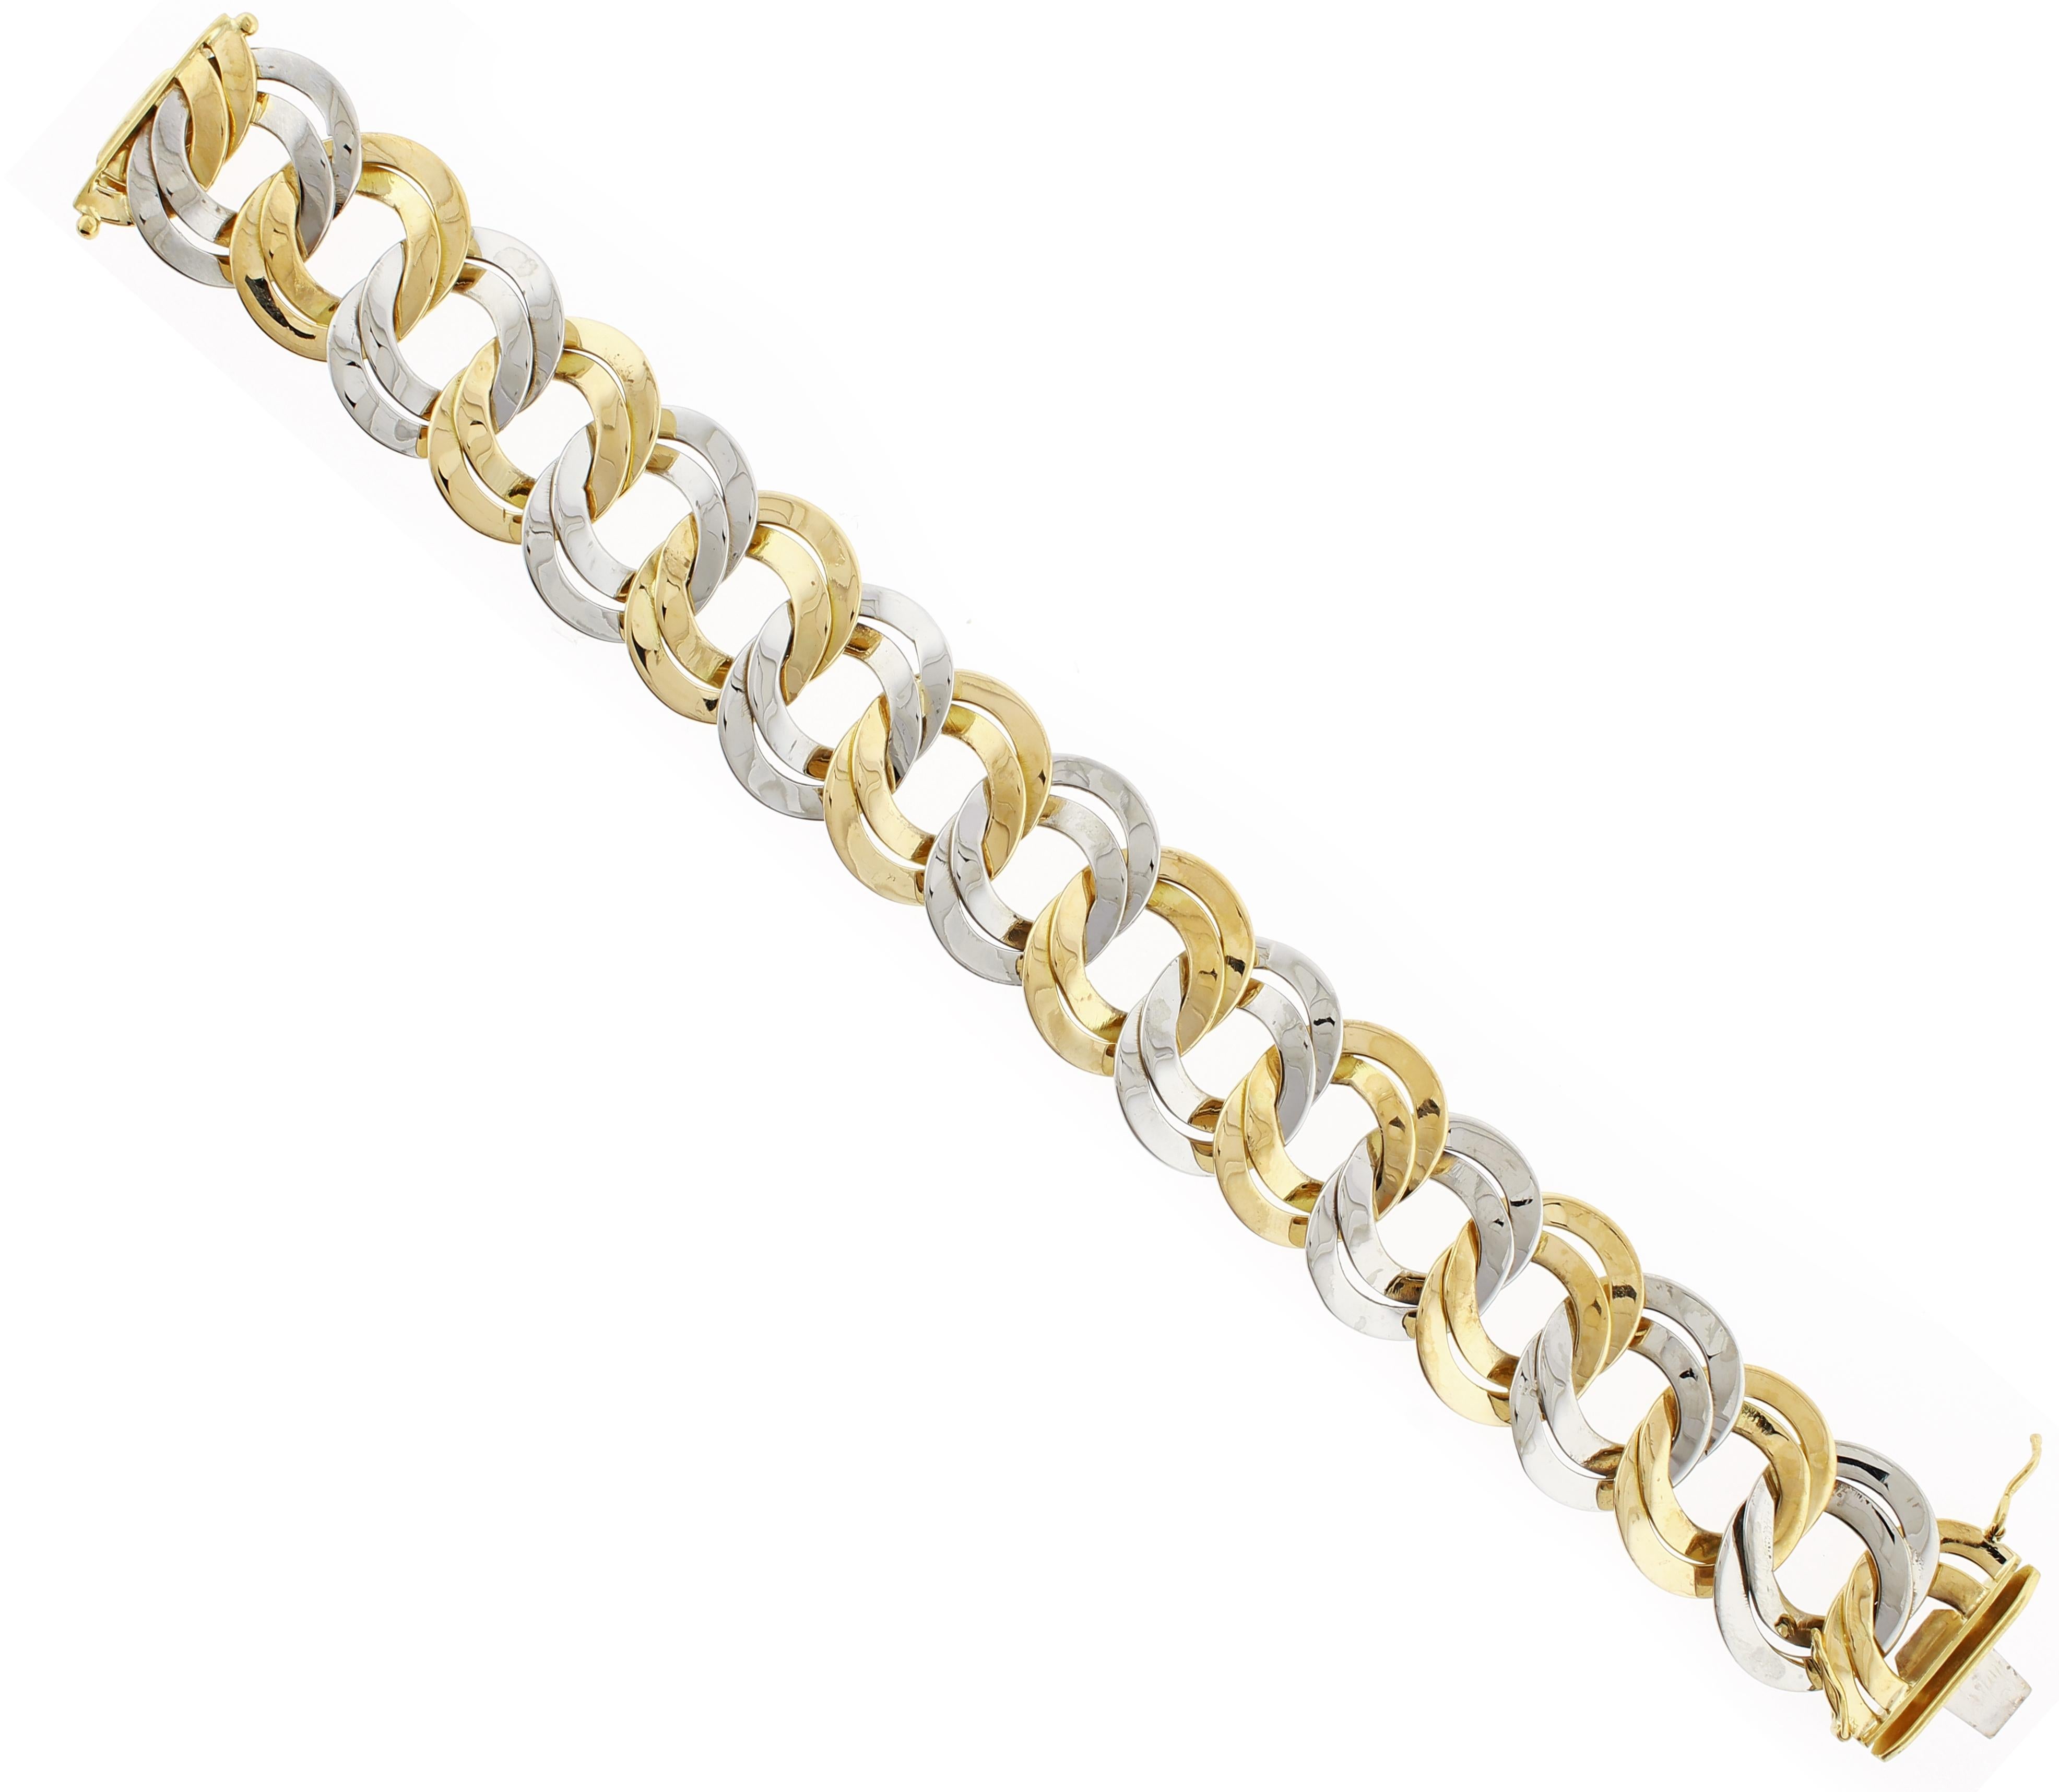 
From Cartier, a bold bracelet comprised of alternating white and yellow flat 18 karat links
♦ Designer: Cartier
♦ Metal: 18 karat
♦ Circa 1980s
♦ 7 5/8ths of and inch  long 8/8ths wide
♦ 58.8 grams
♦ Packaging: Pampillonia presentation box 
♦